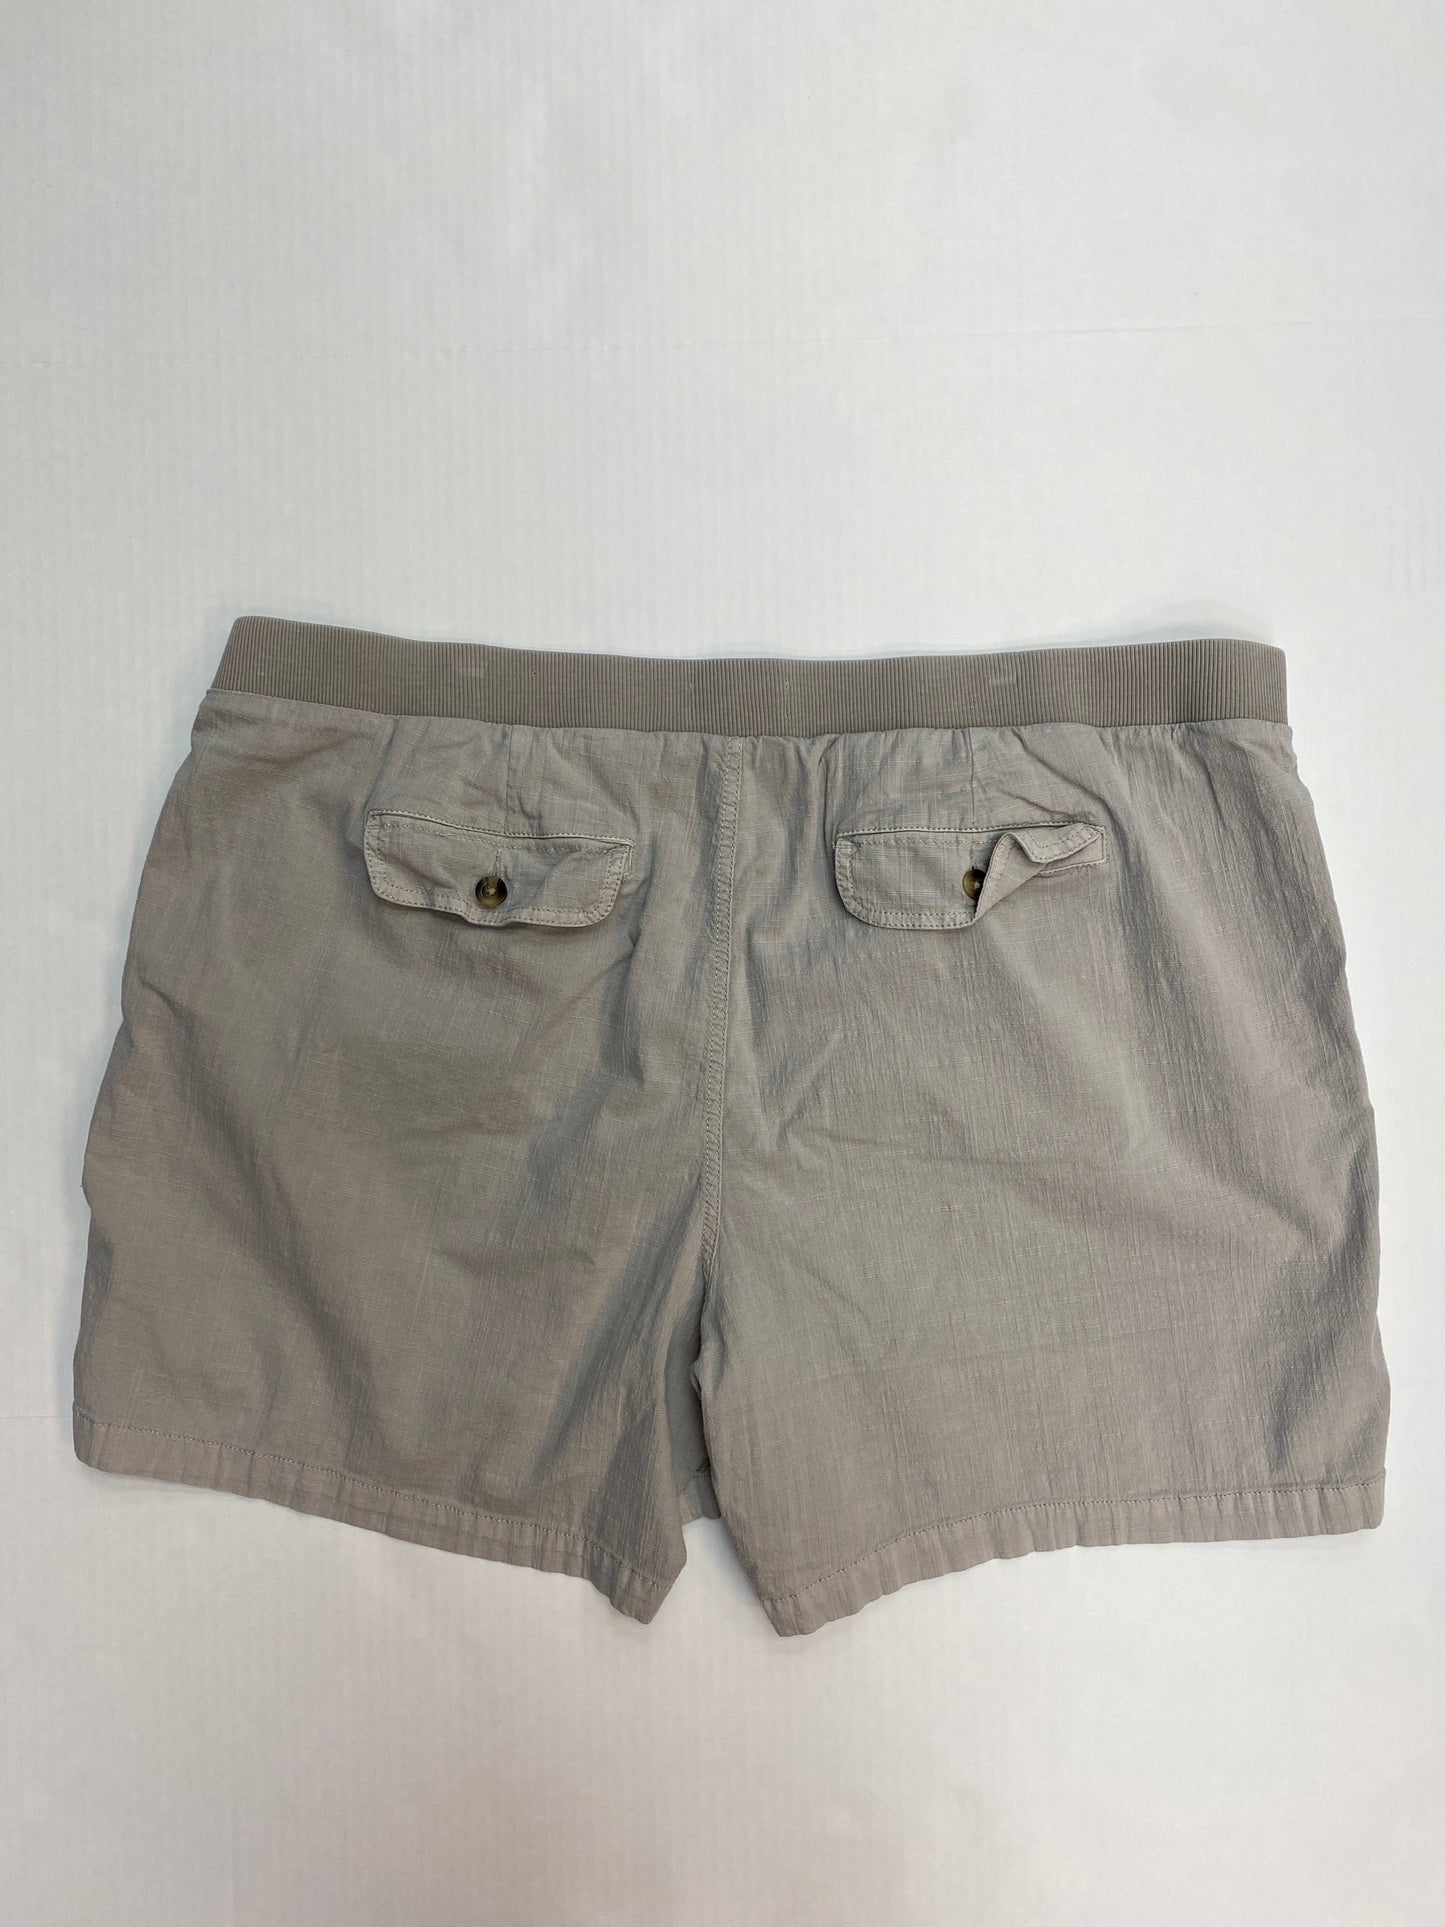 Shorts By Sonoma  Size: 2x